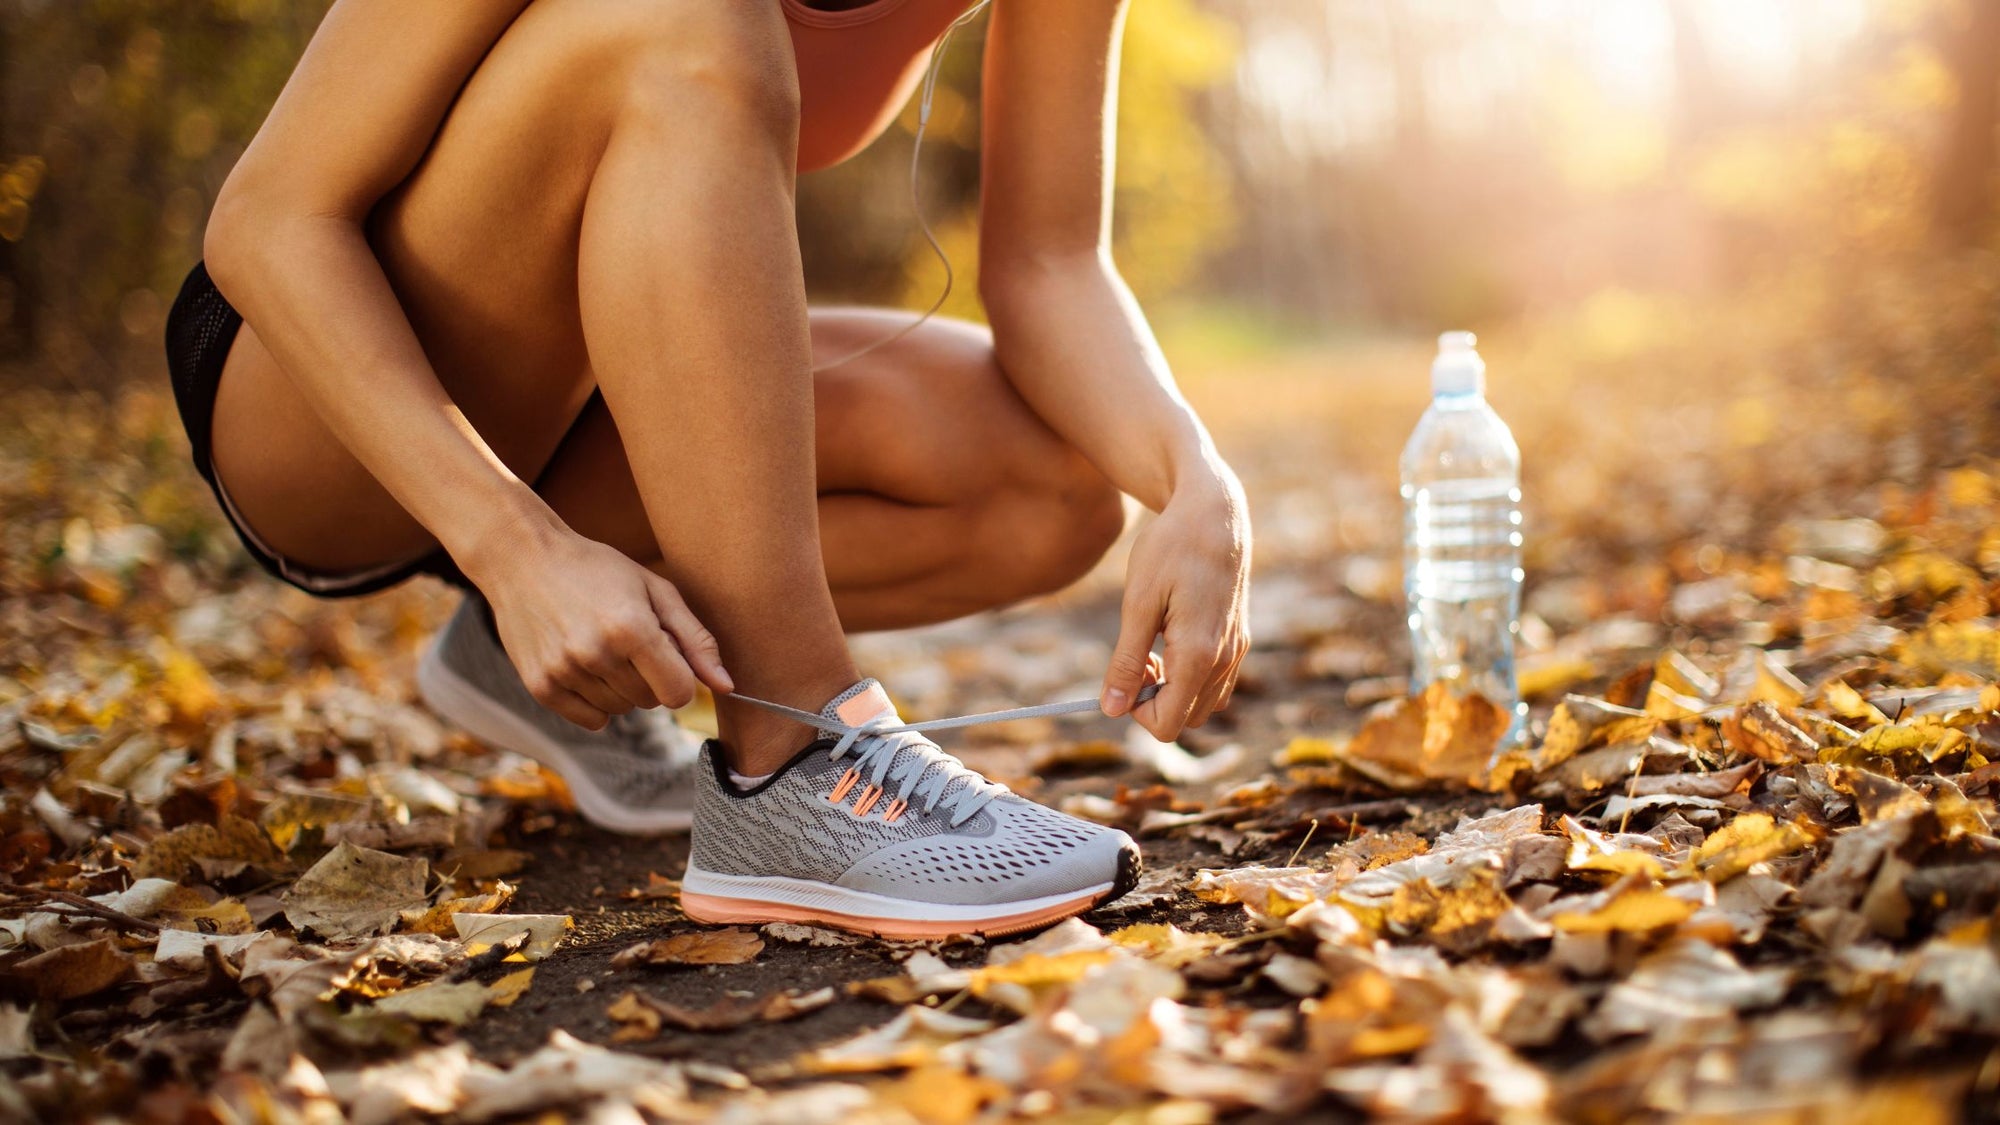 The importance of having good running shoes: What difference does a good pair of running shoes make?